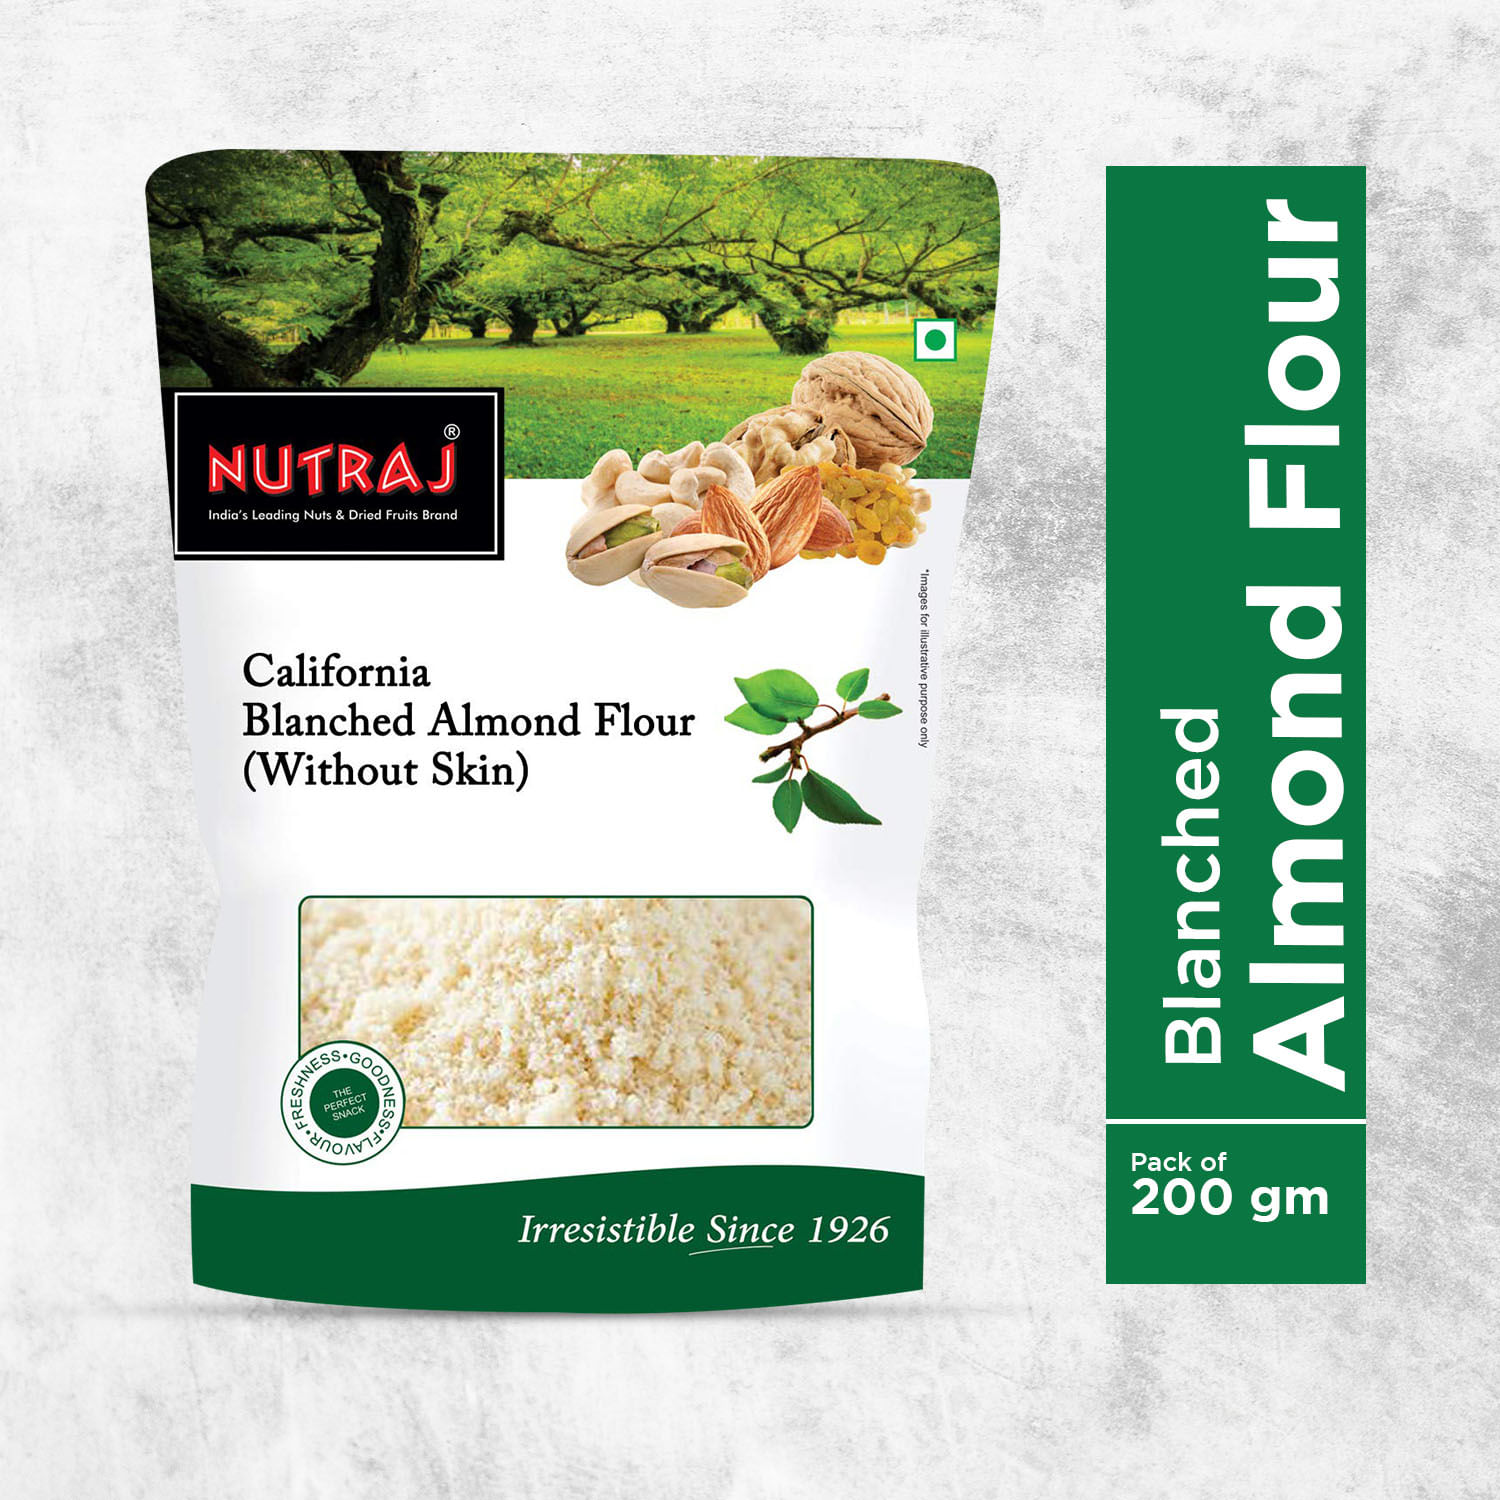 Nutraj California Blanched Almond Flour (Without Skin) 200g